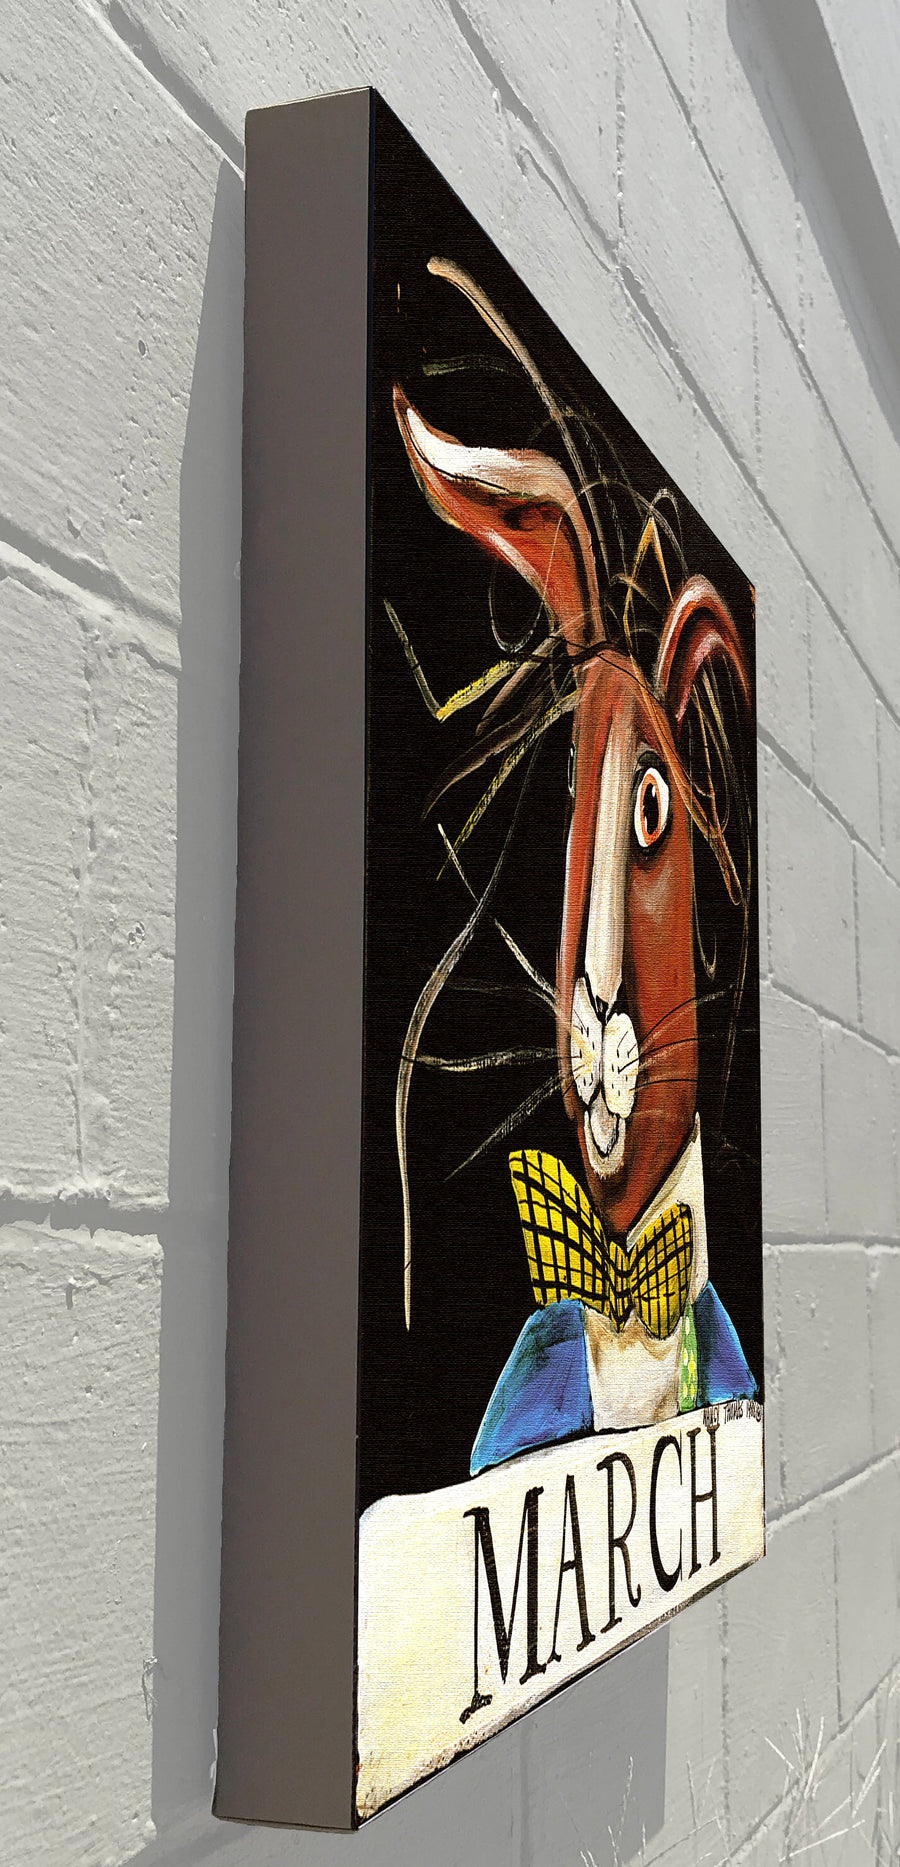 Available Now - March Hare - Original Series